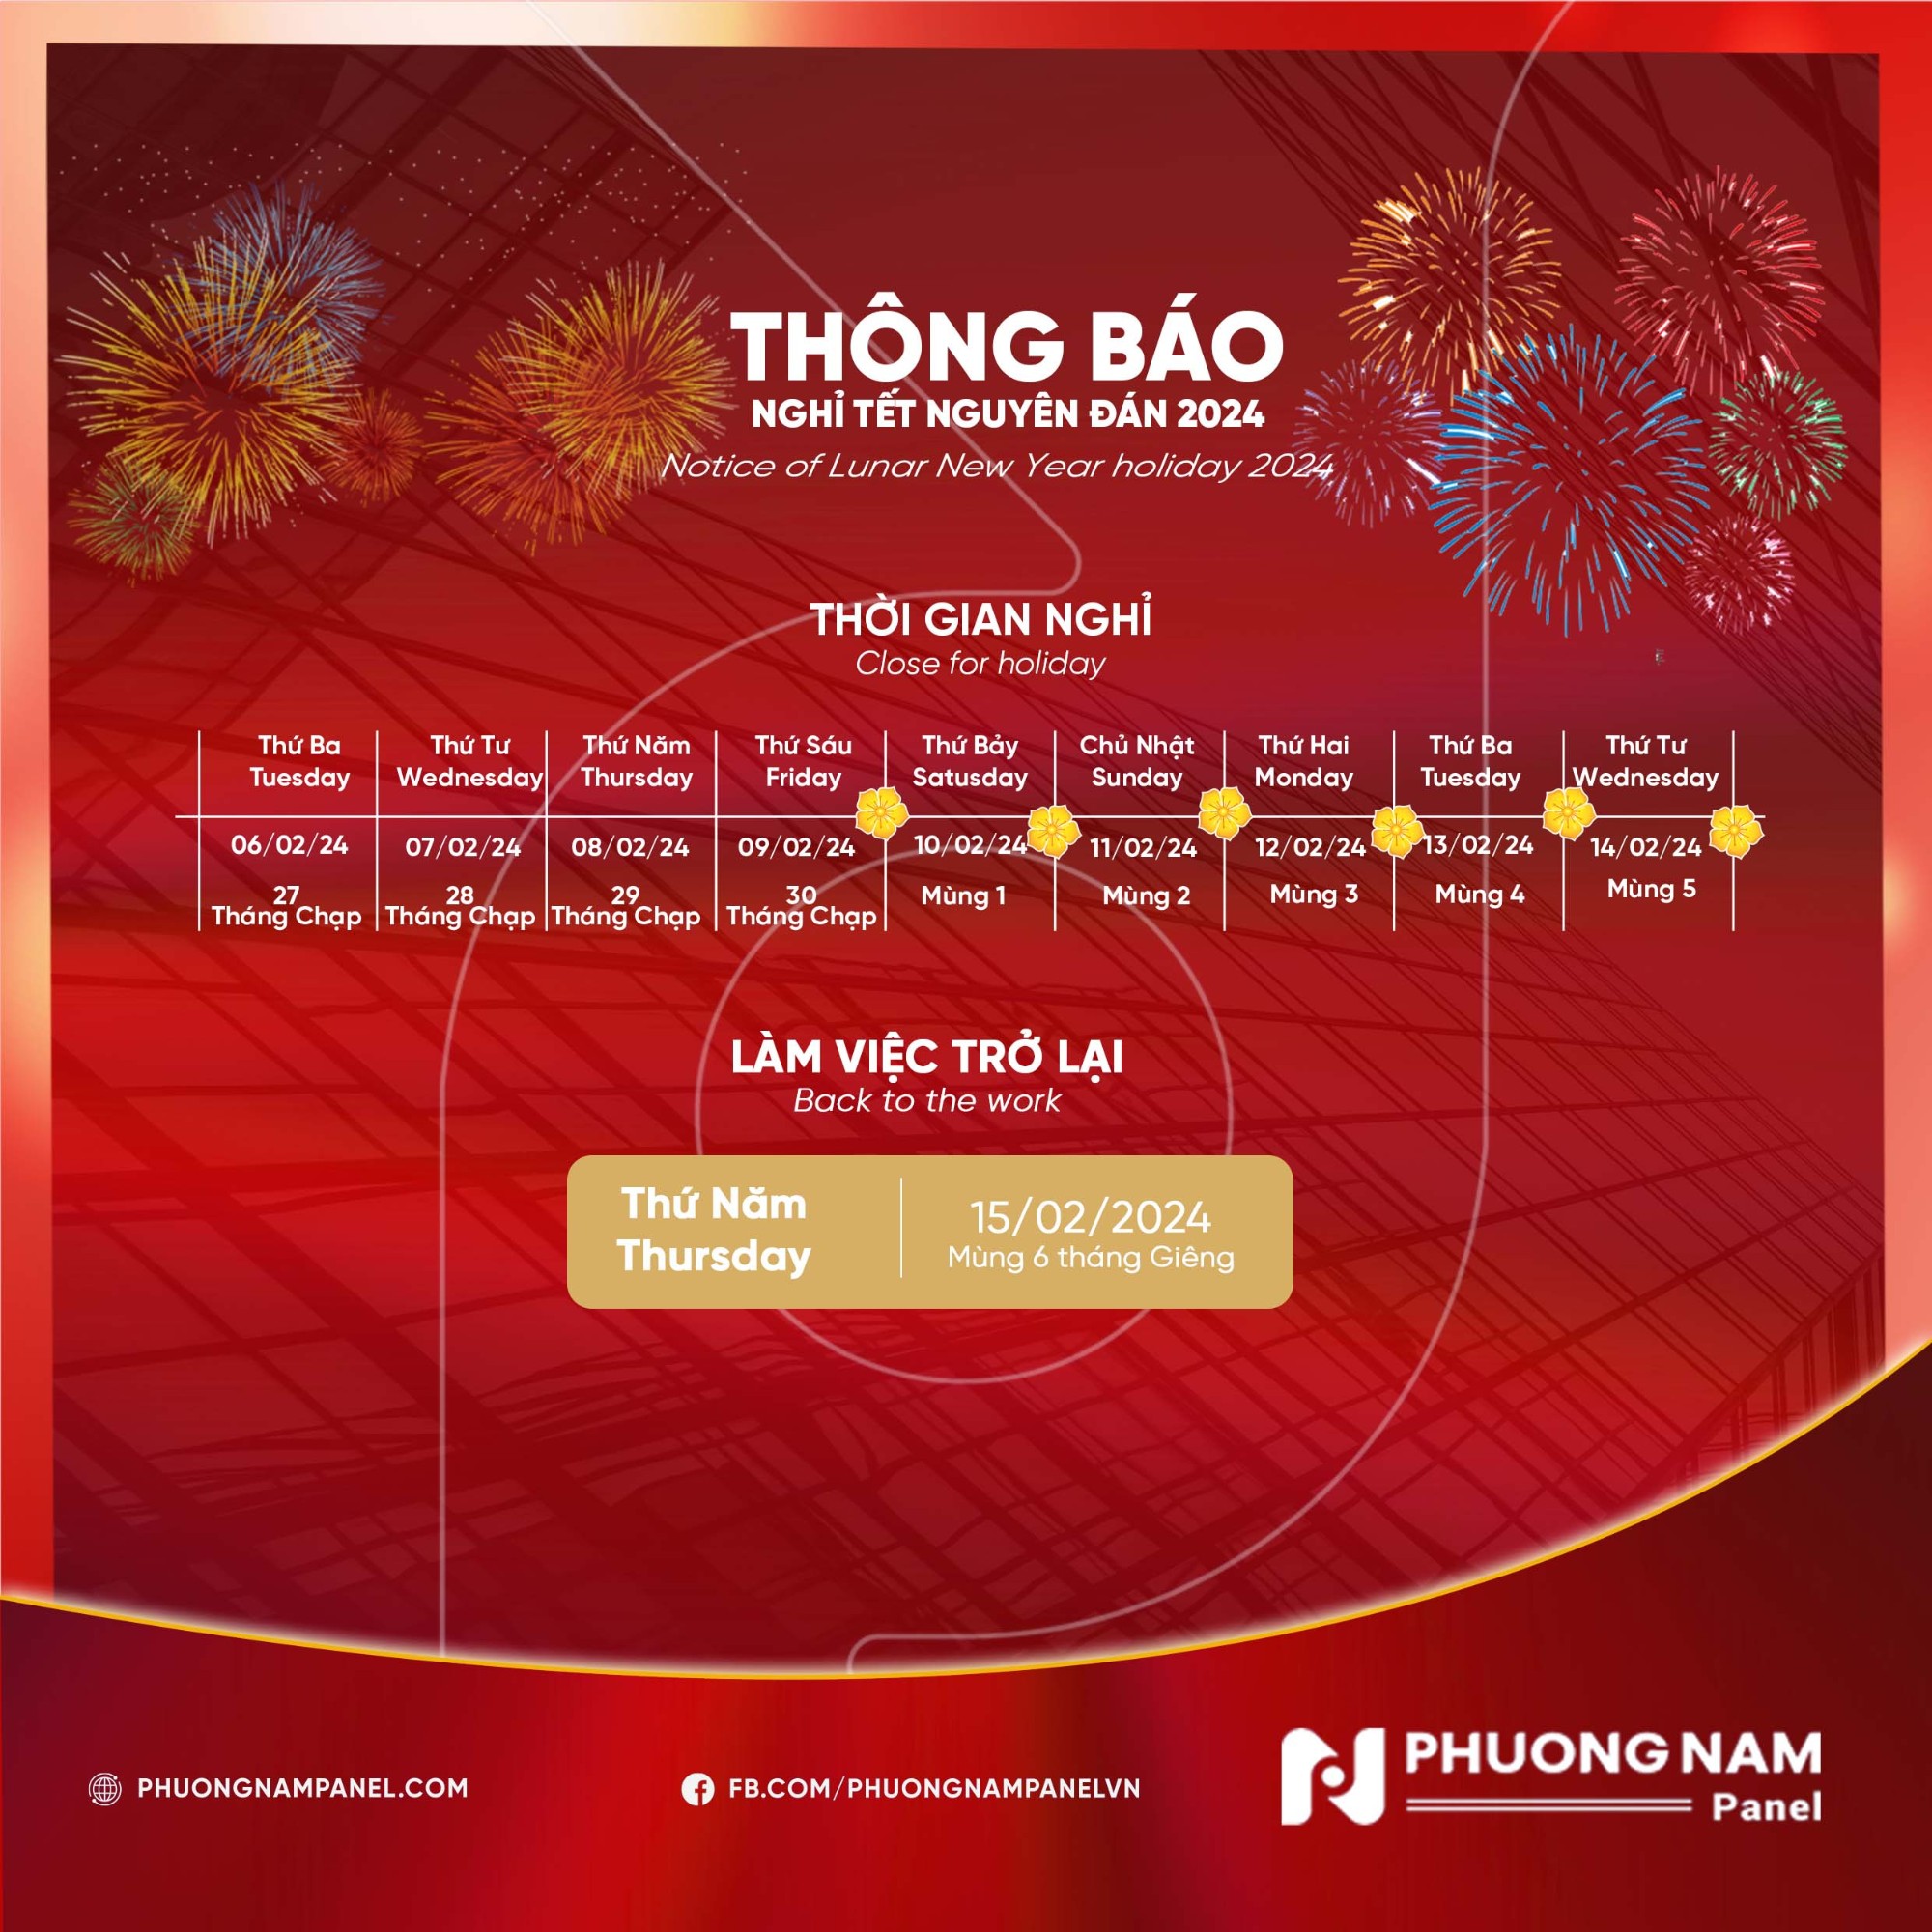 PNP | ANNOUNCEMENT OF LUNAR NEW YEAR HOLIDAY 2024